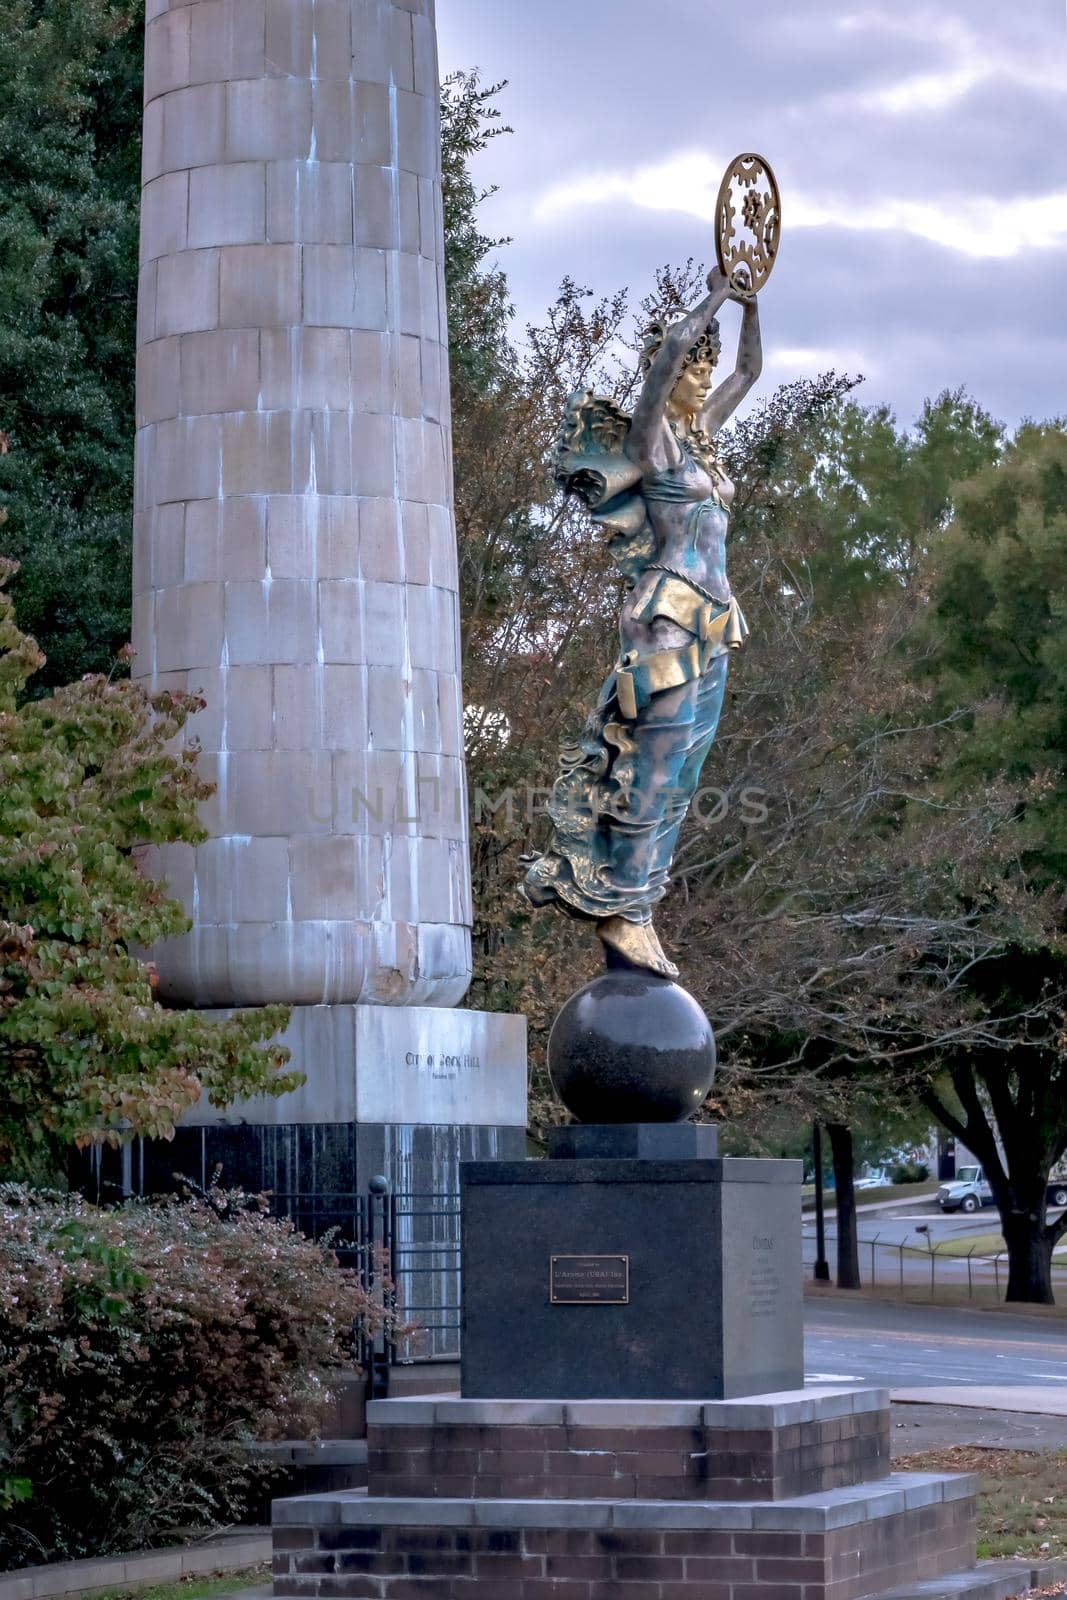 The Civitas statues are beautiful 22 foot-tall sculptures that stand at the intersection of Dave Lyle Blvd. and Gateway Blvd, and in the Rotunda of Rock Hill City Hall. by digidreamgrafix